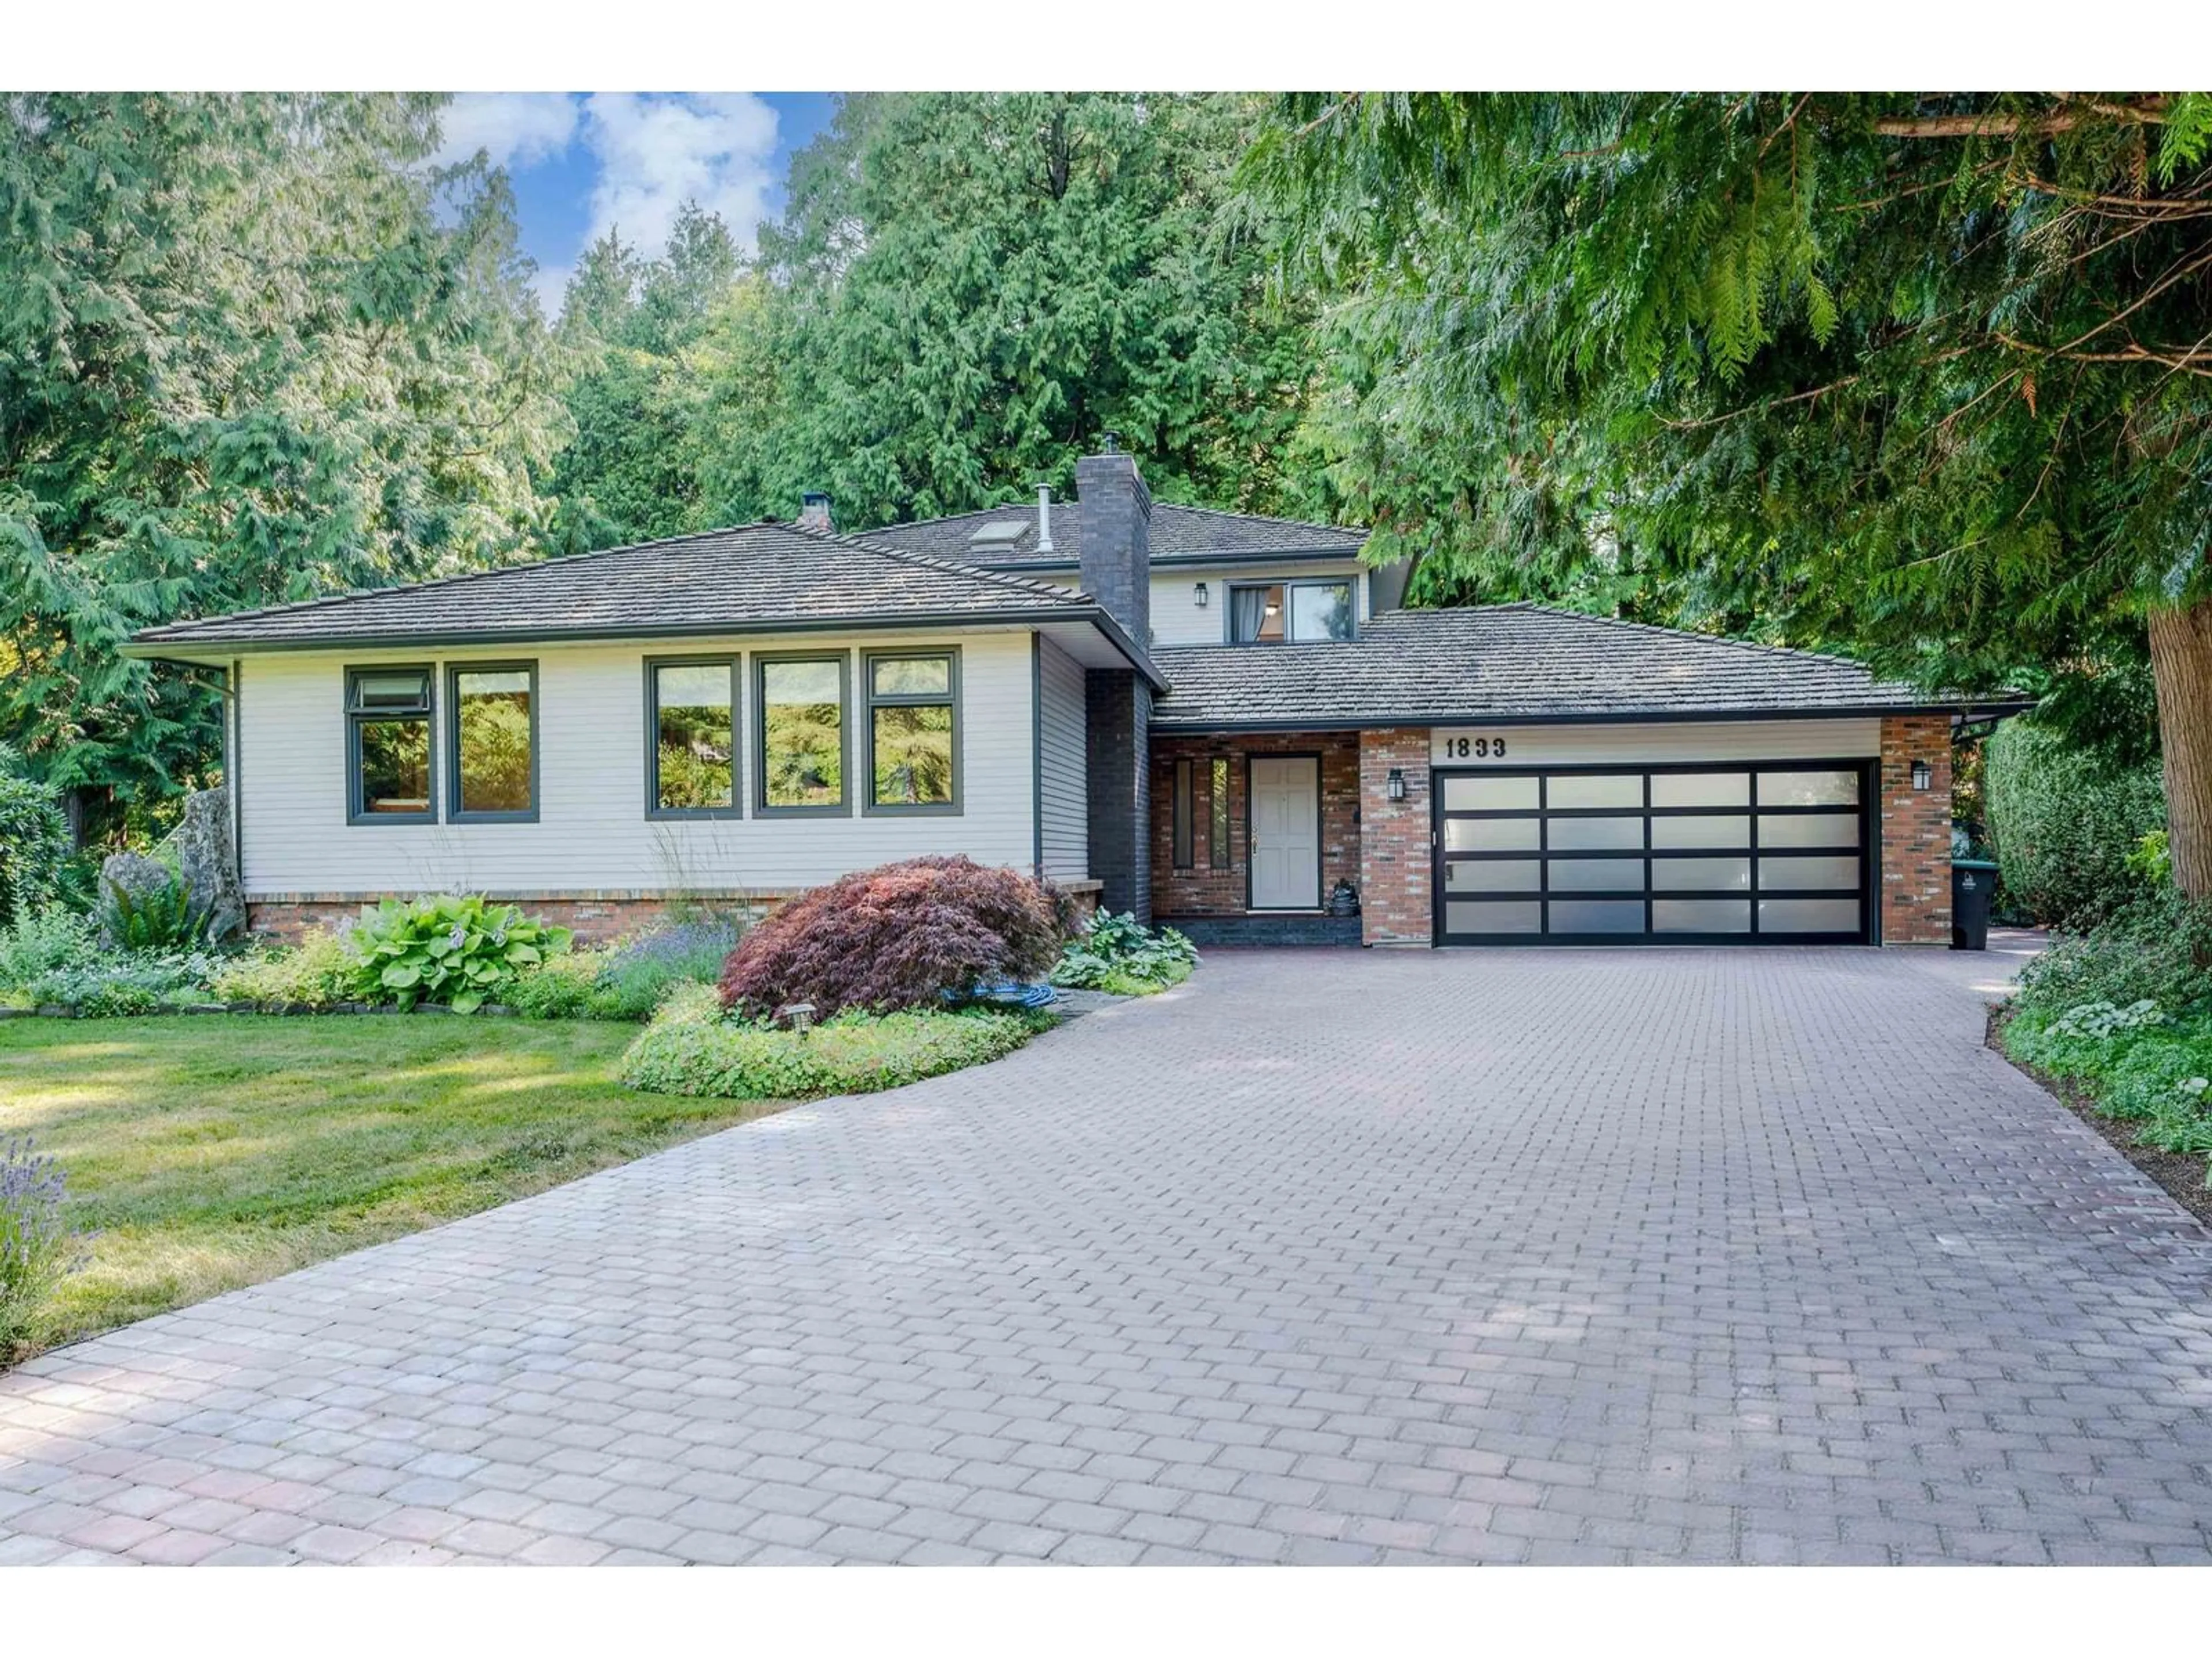 Home with brick exterior material for 1833 133A STREET, Surrey British Columbia V4A7M4